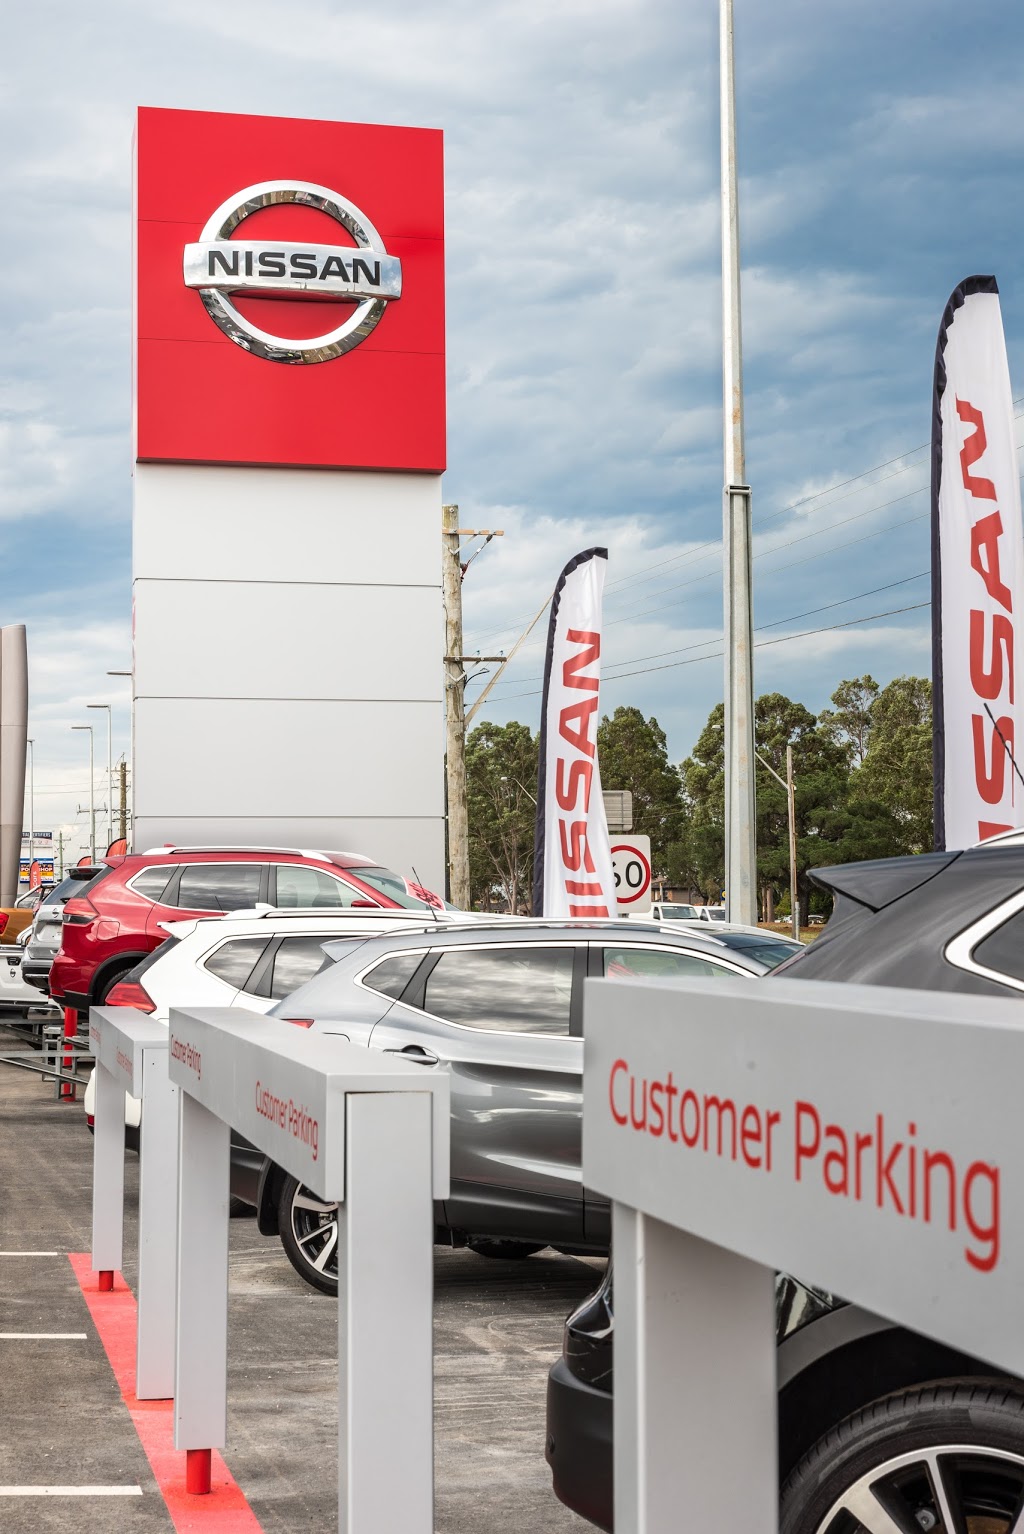 Liverpool Nissan | car dealer | 411 Hume Hwy, Liverpool NSW 2170, Australia | 0296015777 OR +61 2 9601 5777